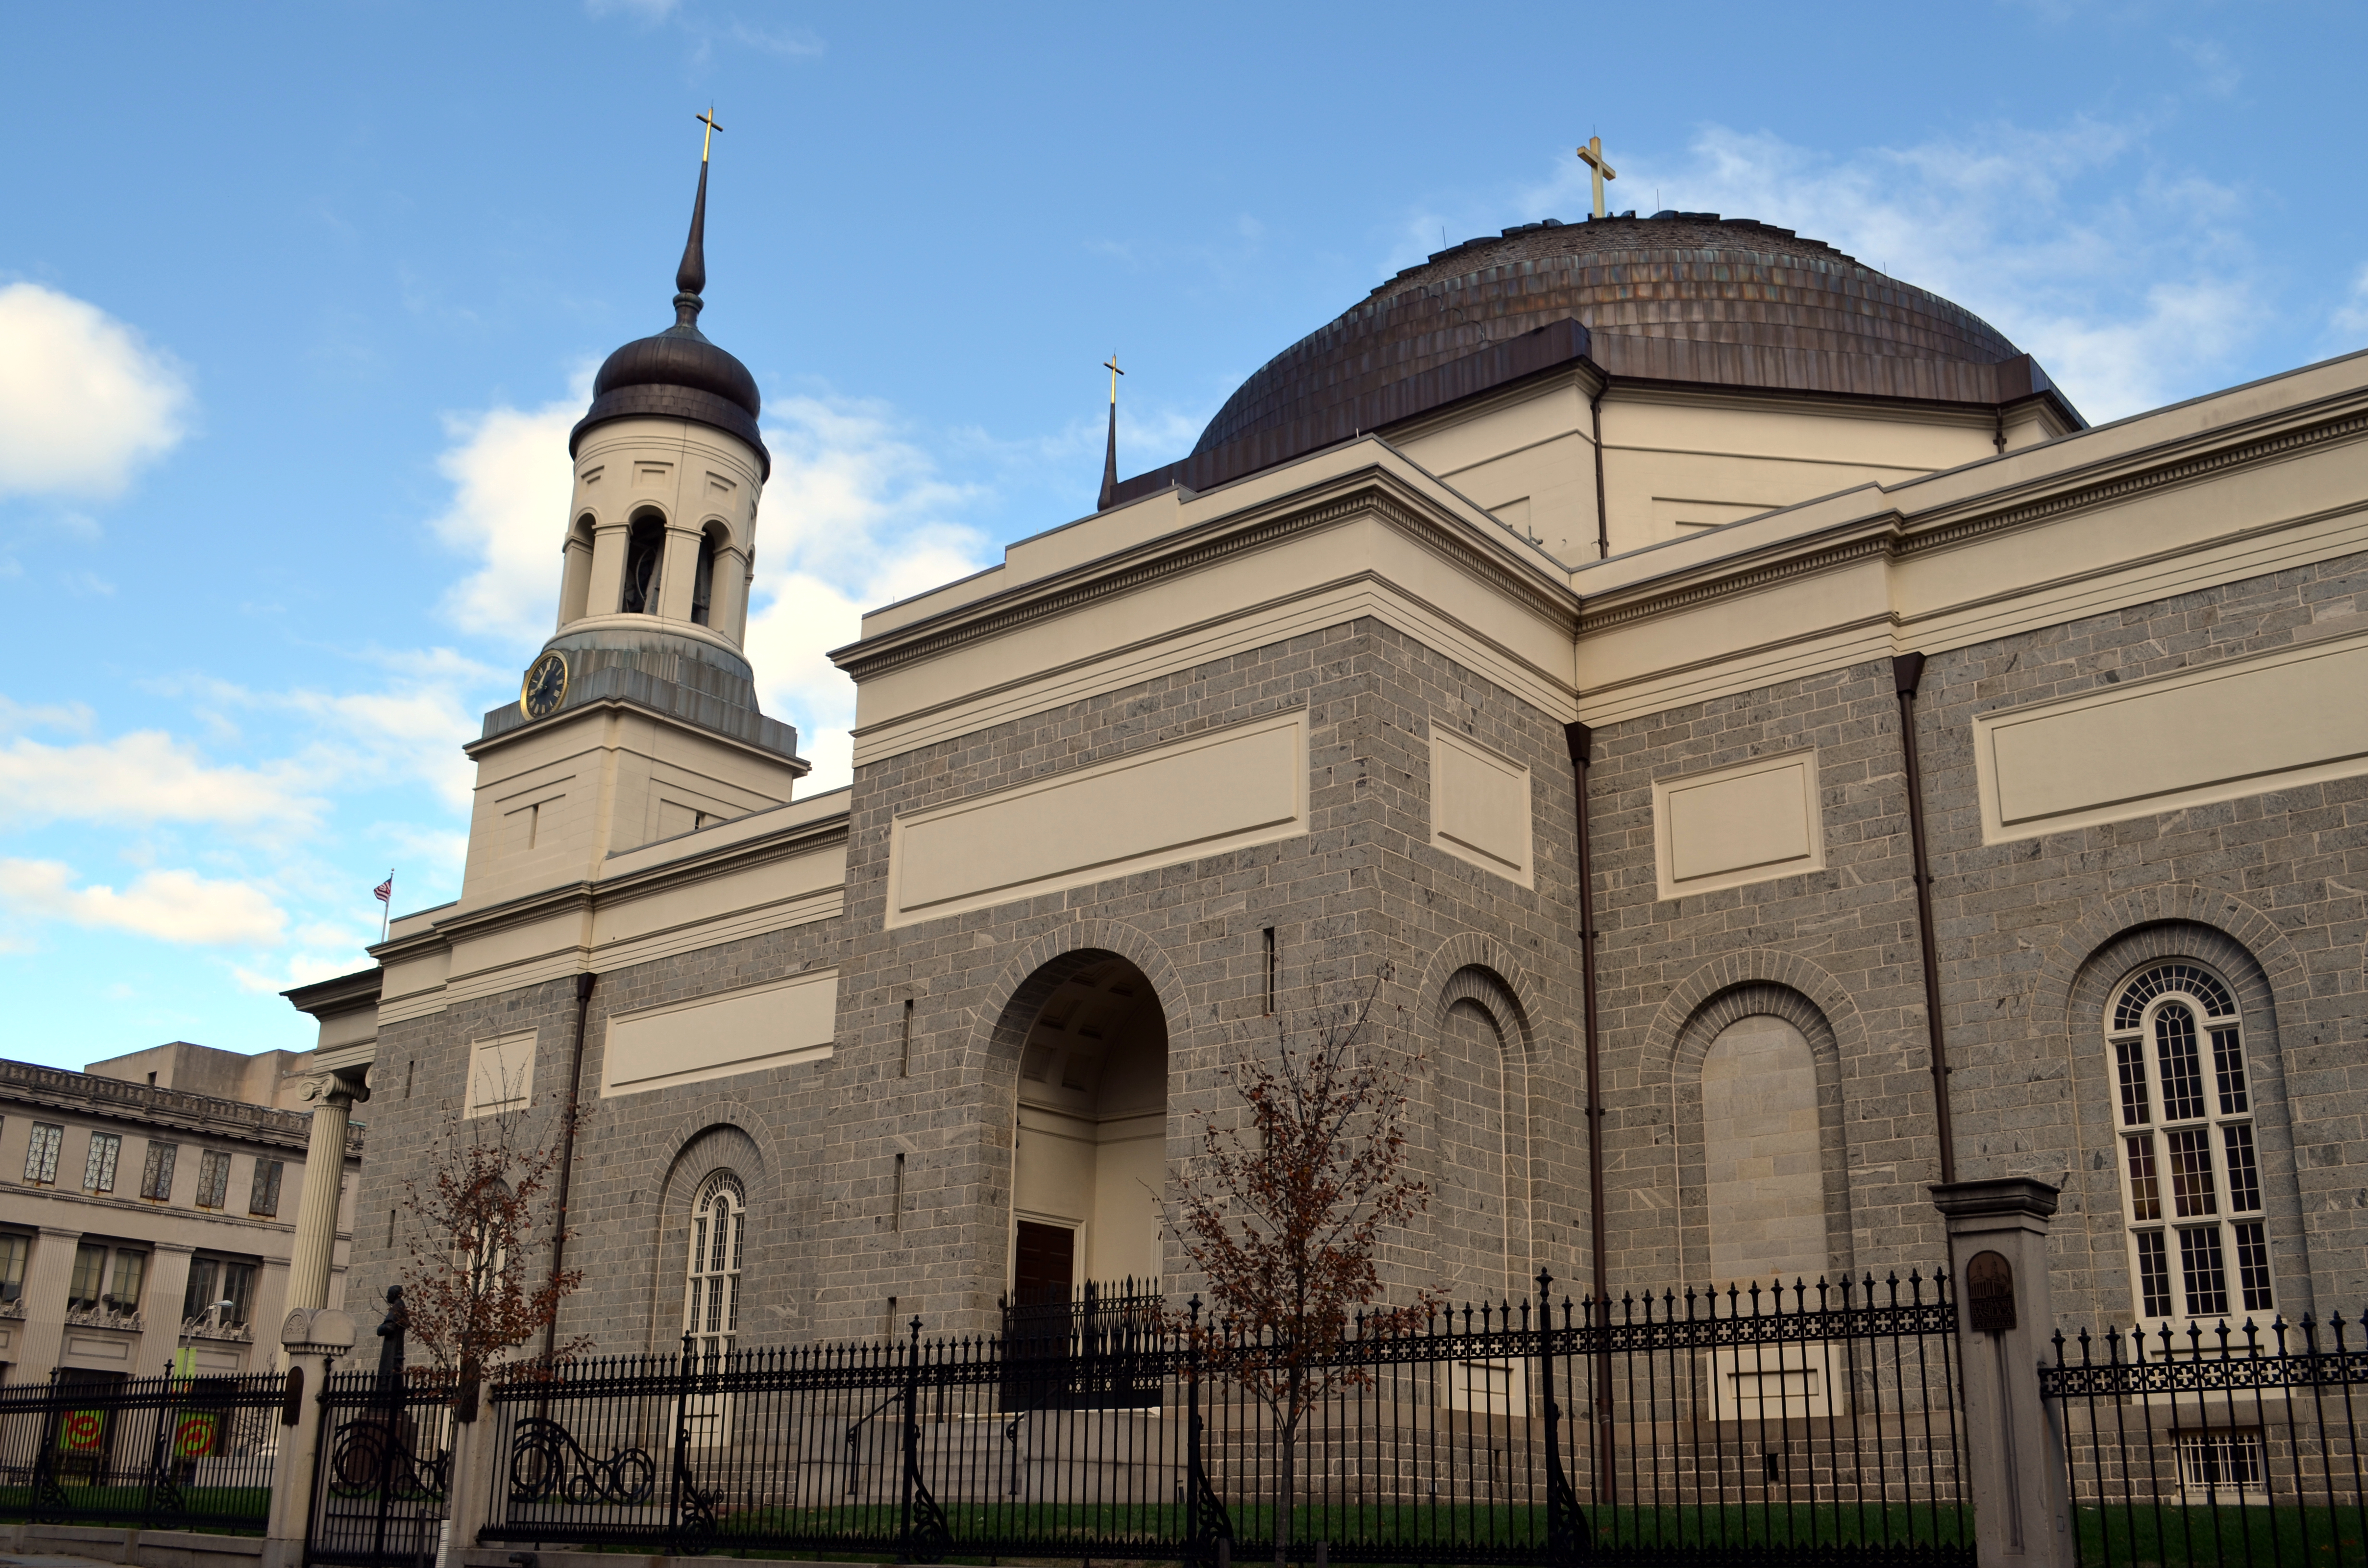 Construction of the Basilica of the Assumption of the Blessed Virgin Mary, or Baltimore Basilica, began in 1806